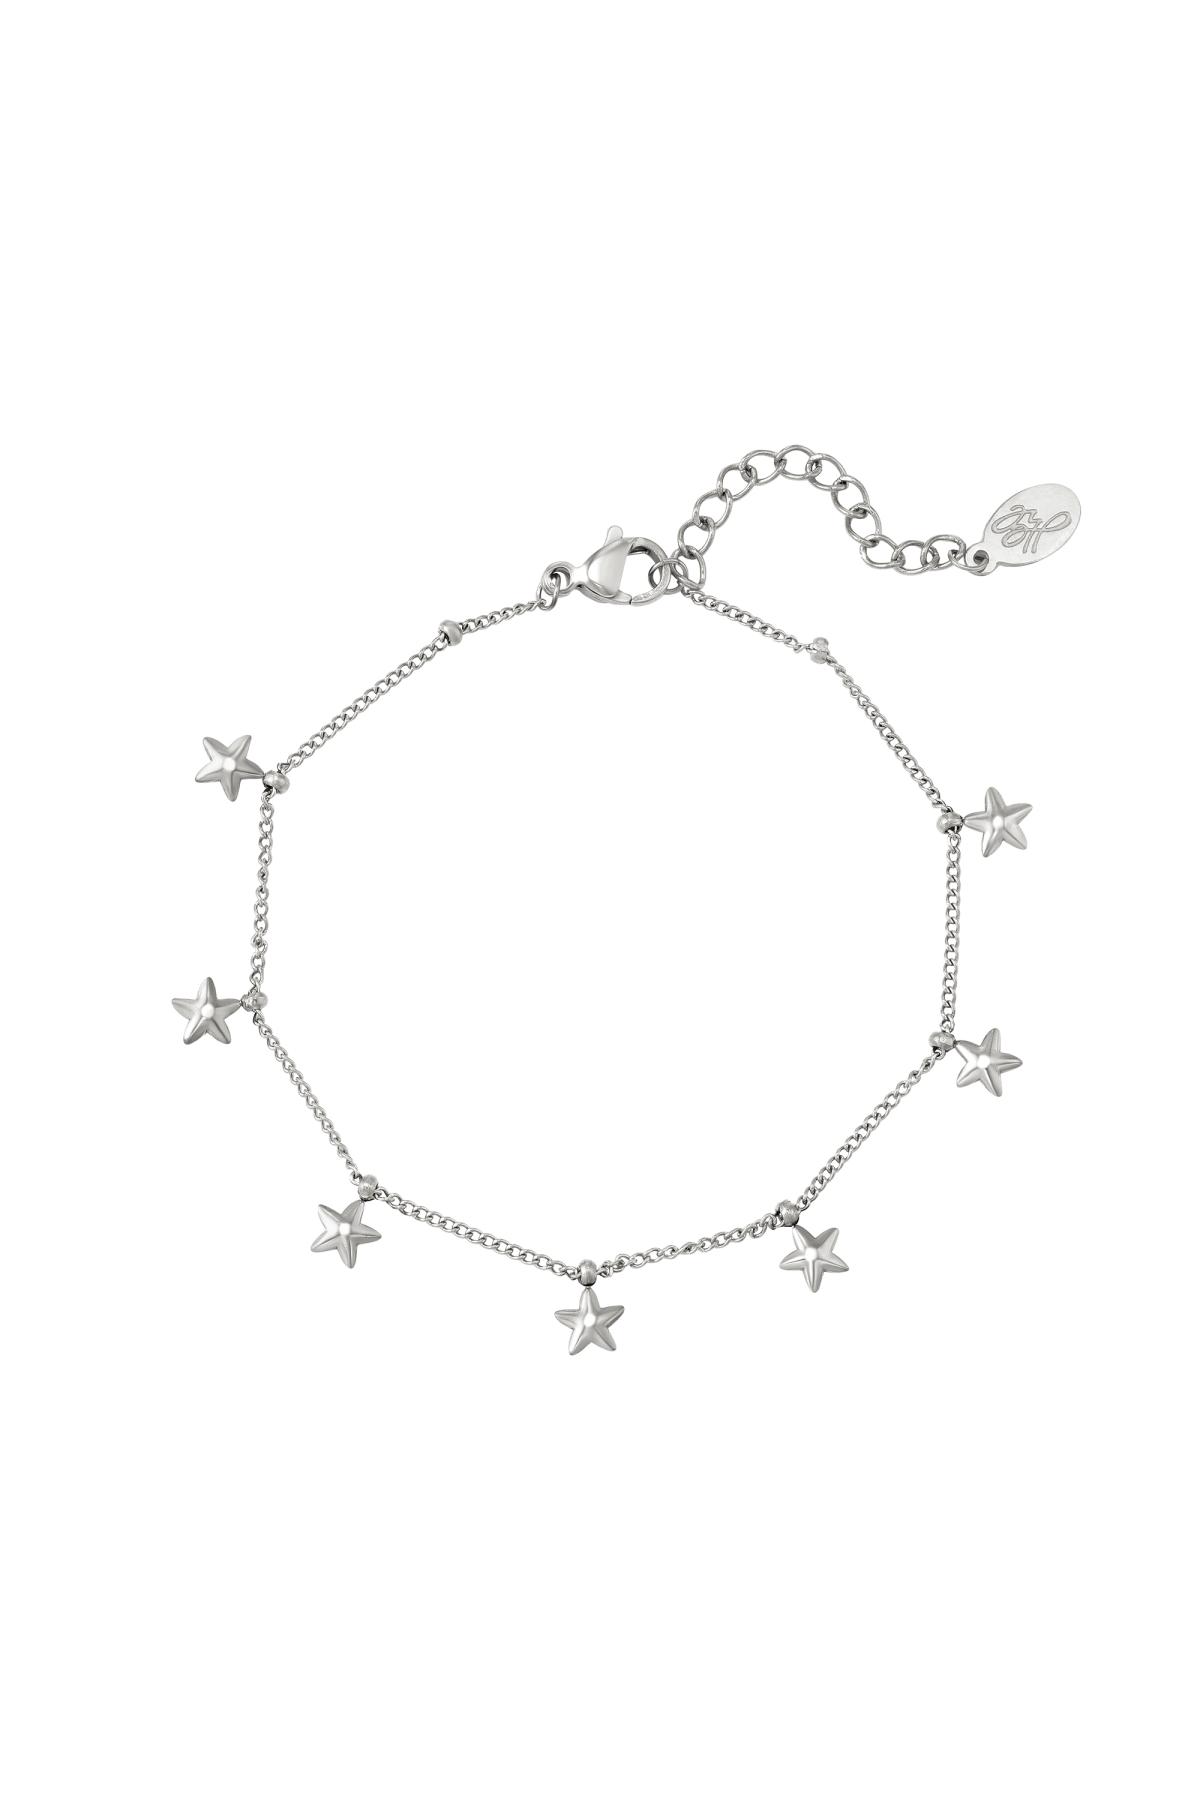 Bracelet star charms Silver Stainless Steel 